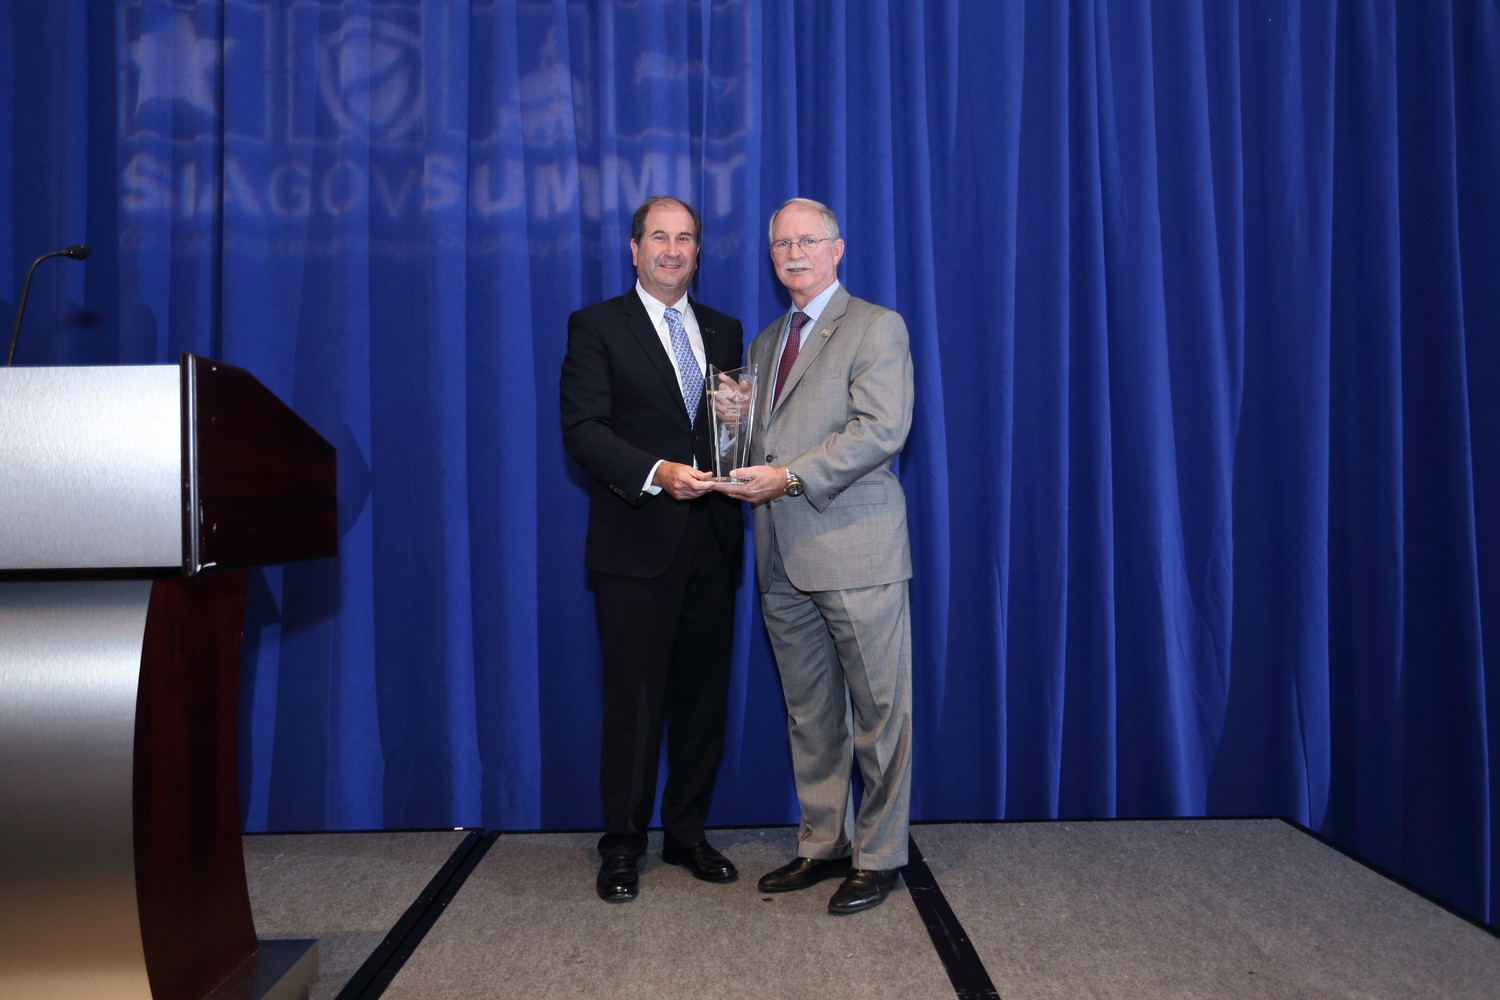 Congressman John Rutherford (right) receives the SIA Legislator of the Year Award for his work on the STOP School Violence Act following the Parkland shooting.